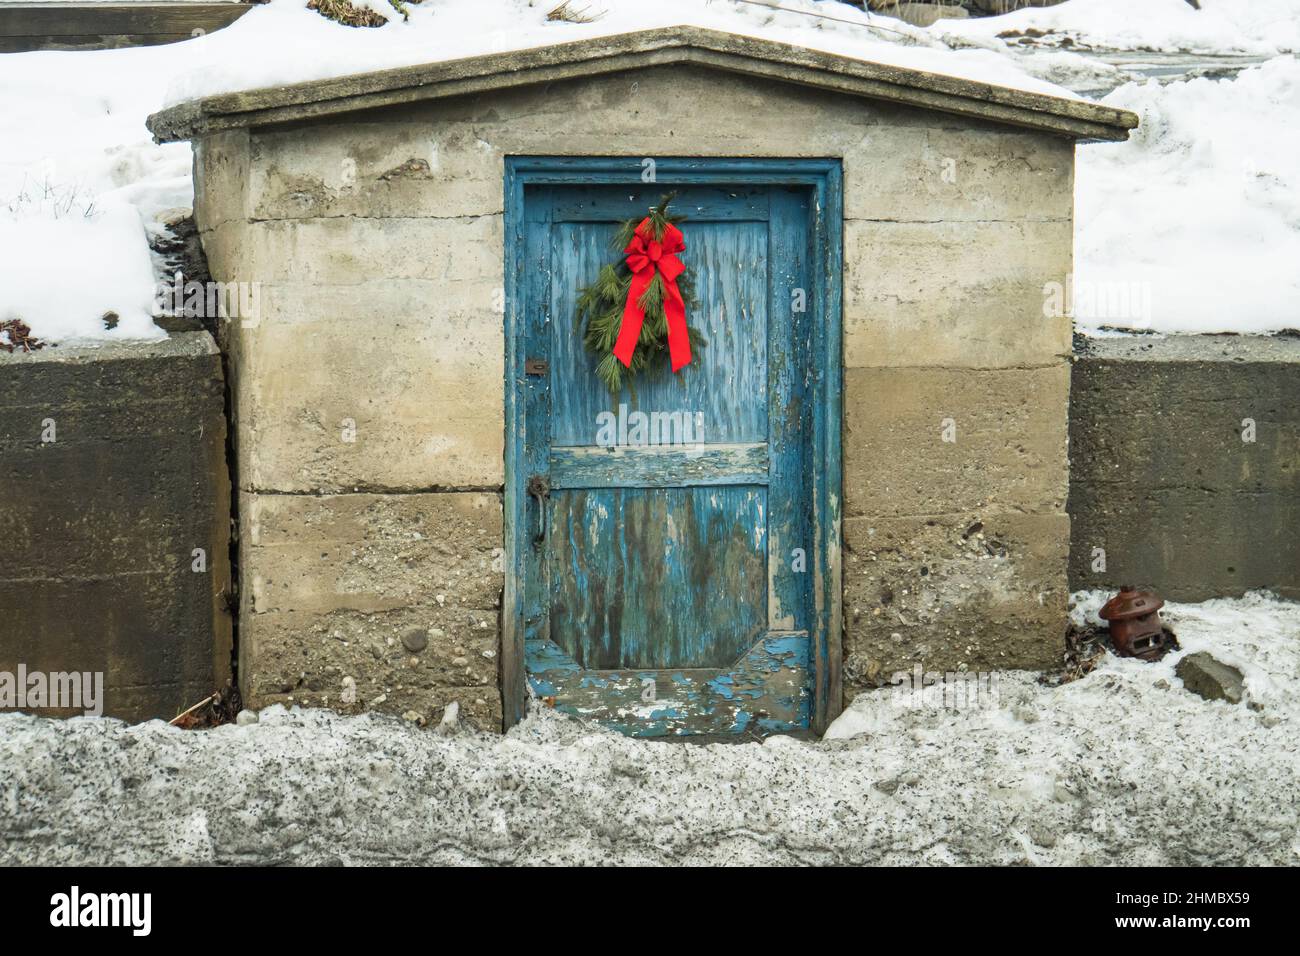 a town shed with peeling blue painted door and a holiday evergreen bough with a red bow Stock Photo